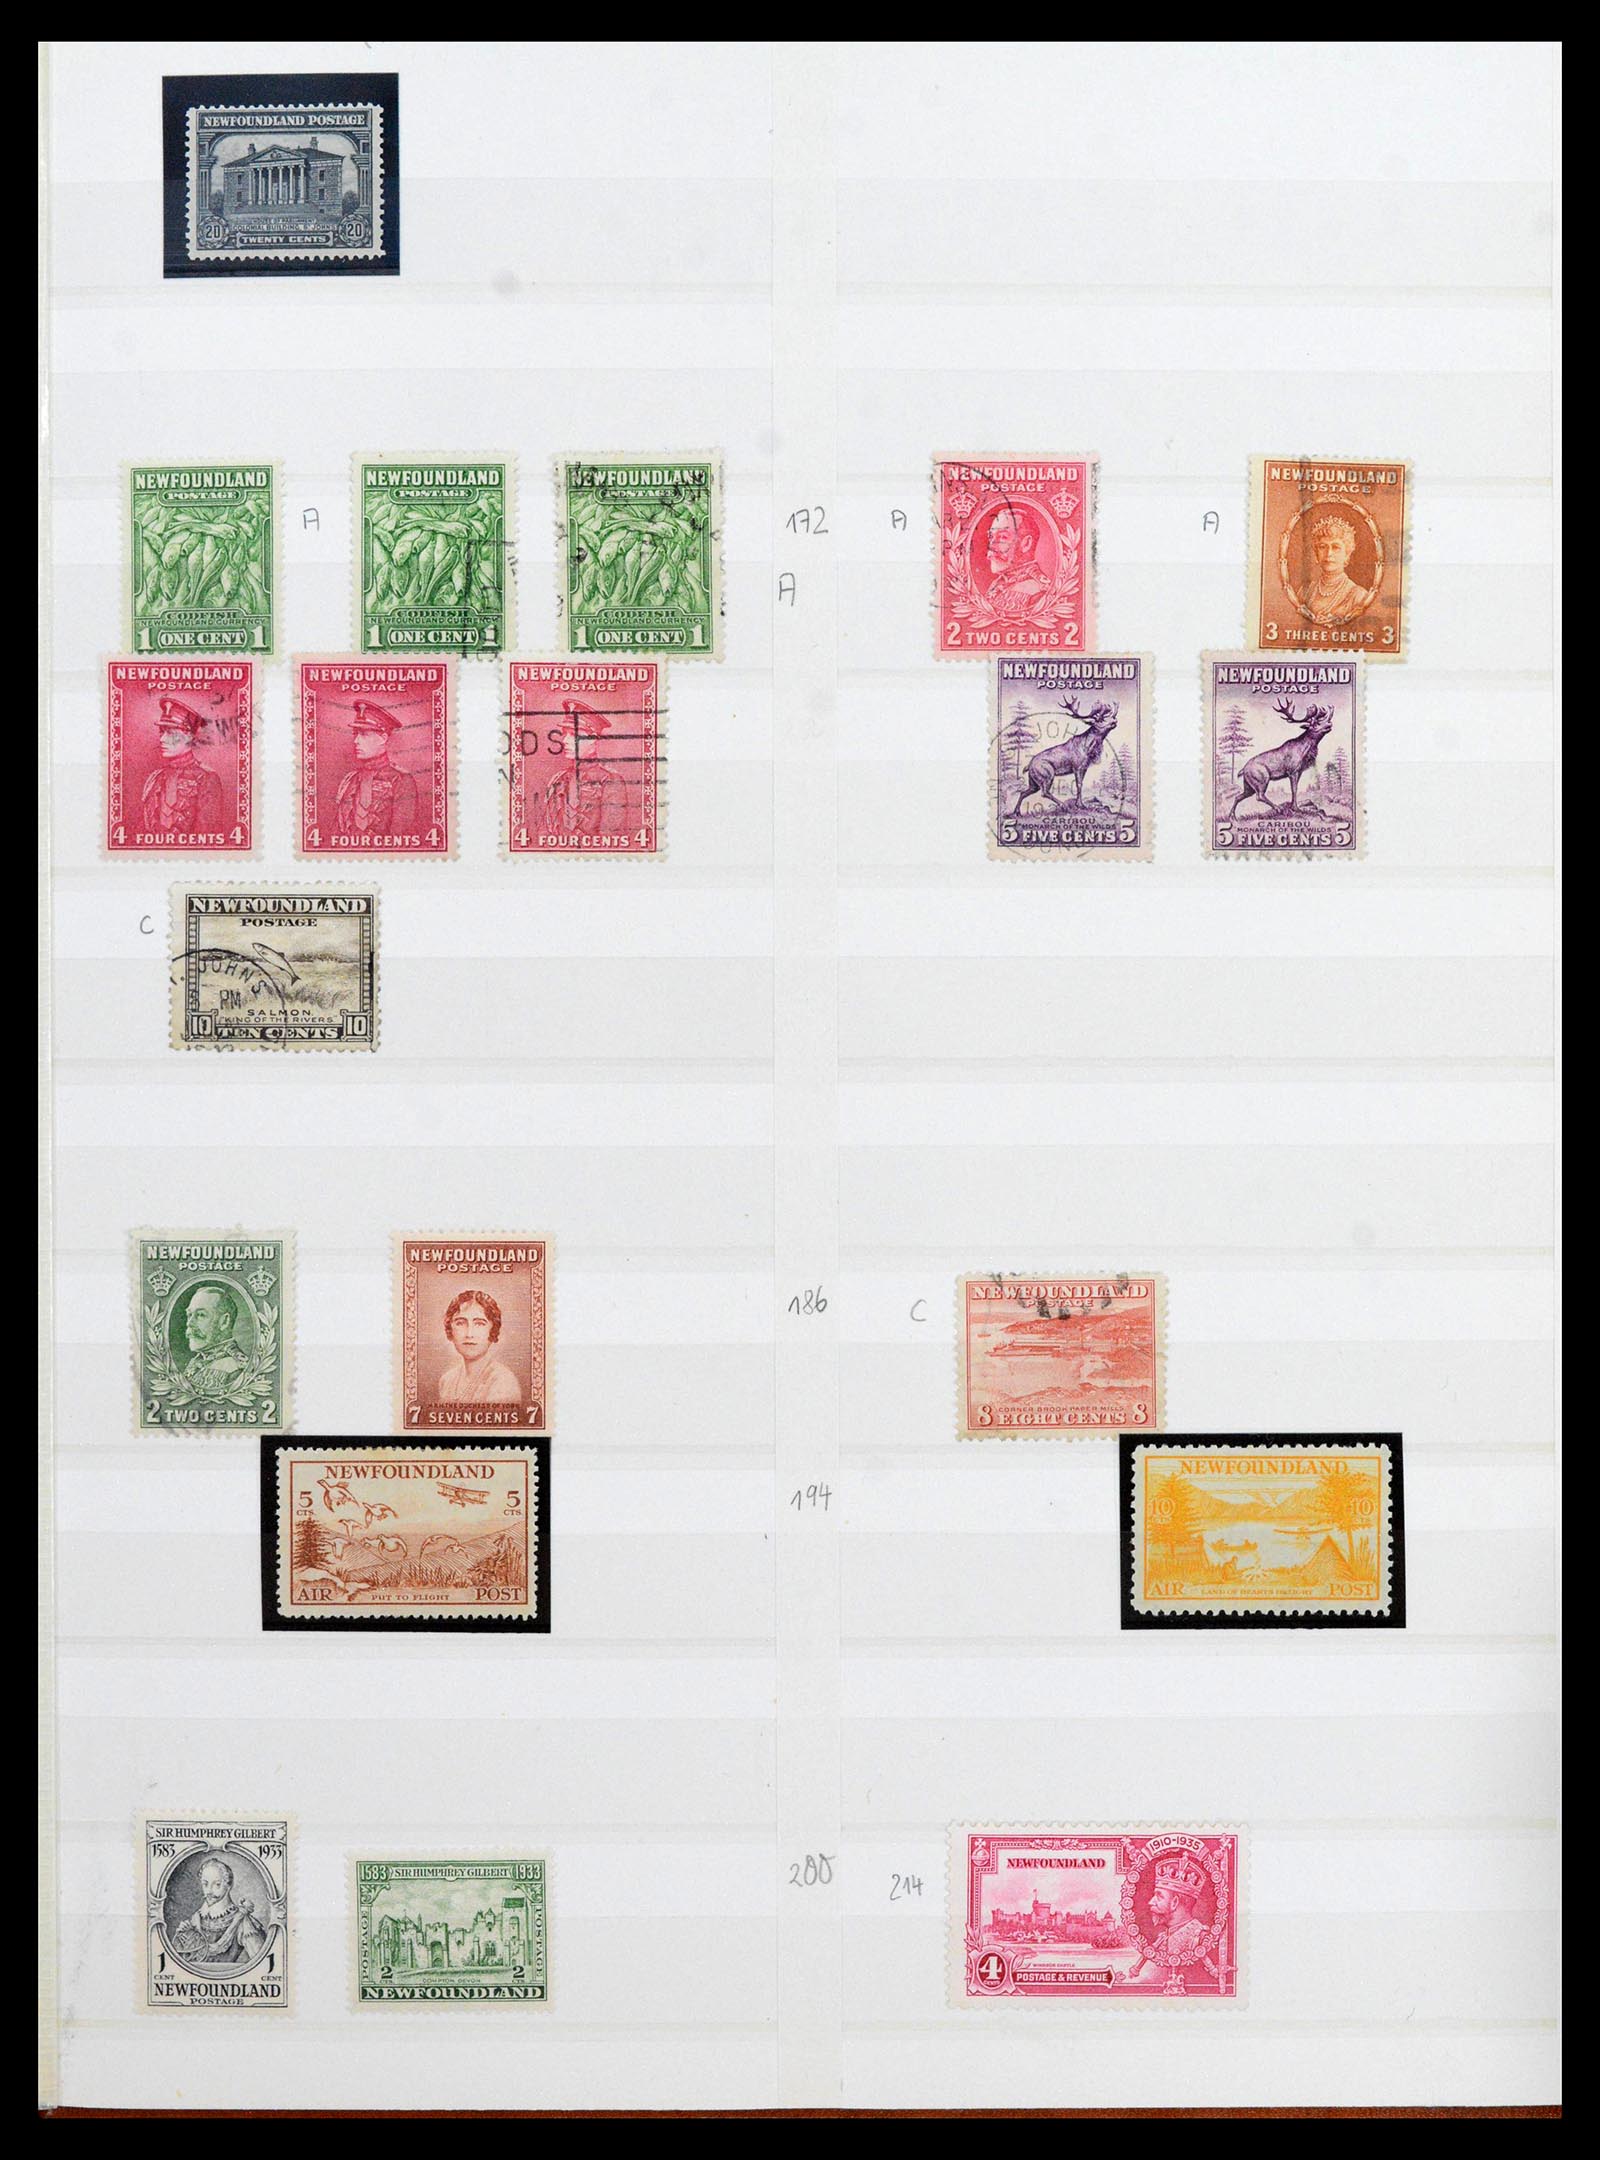 39199 0013 - Stamp collection 39199 Canada and provinces 1851-1970.